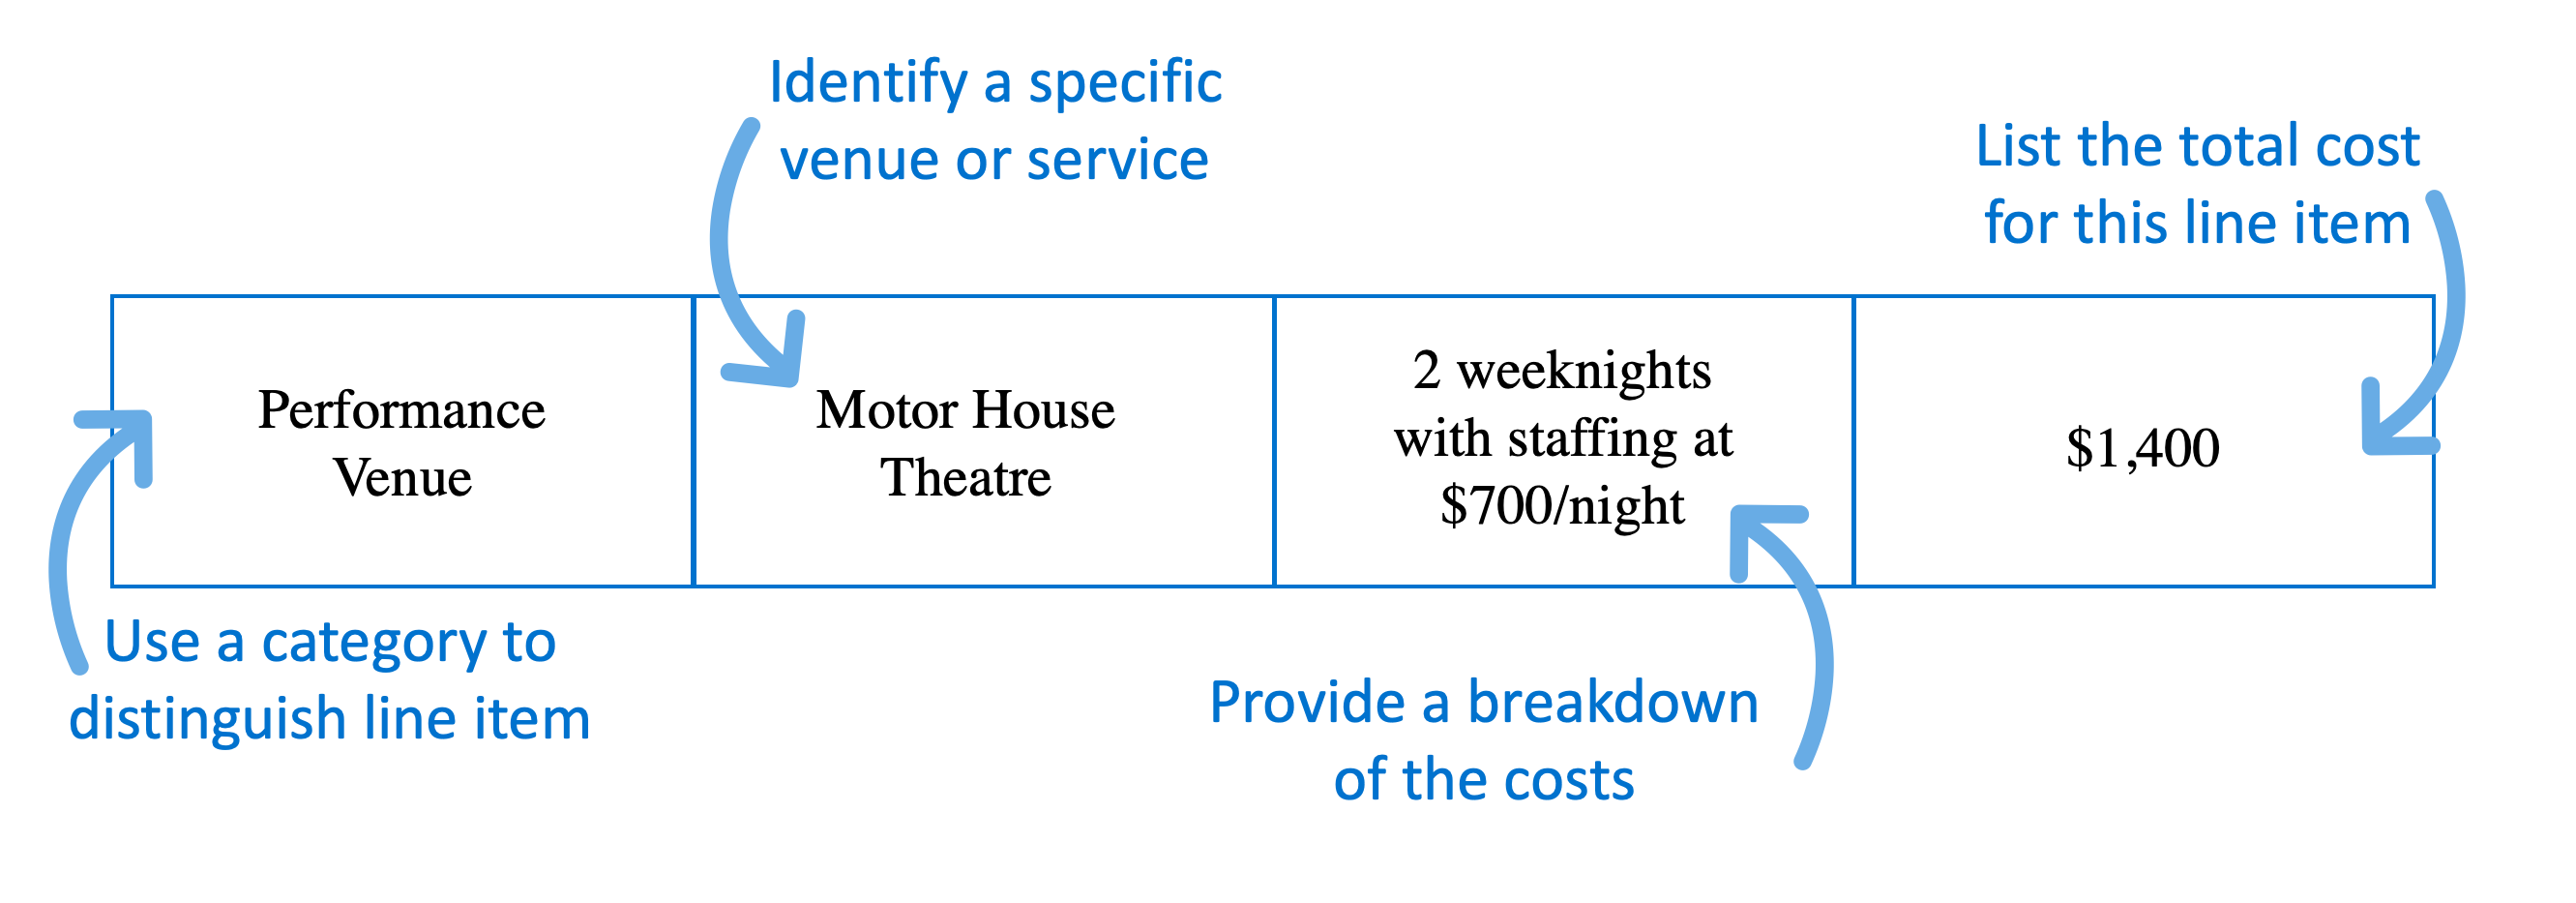 Use a category to distinguish line item (performance venue); Identify a specific venue or service (Motor House Theatre); Provide a breakdown of the costs (2 weeknights with staffing at $700 per night); List the total cost for this line item ($1,400)